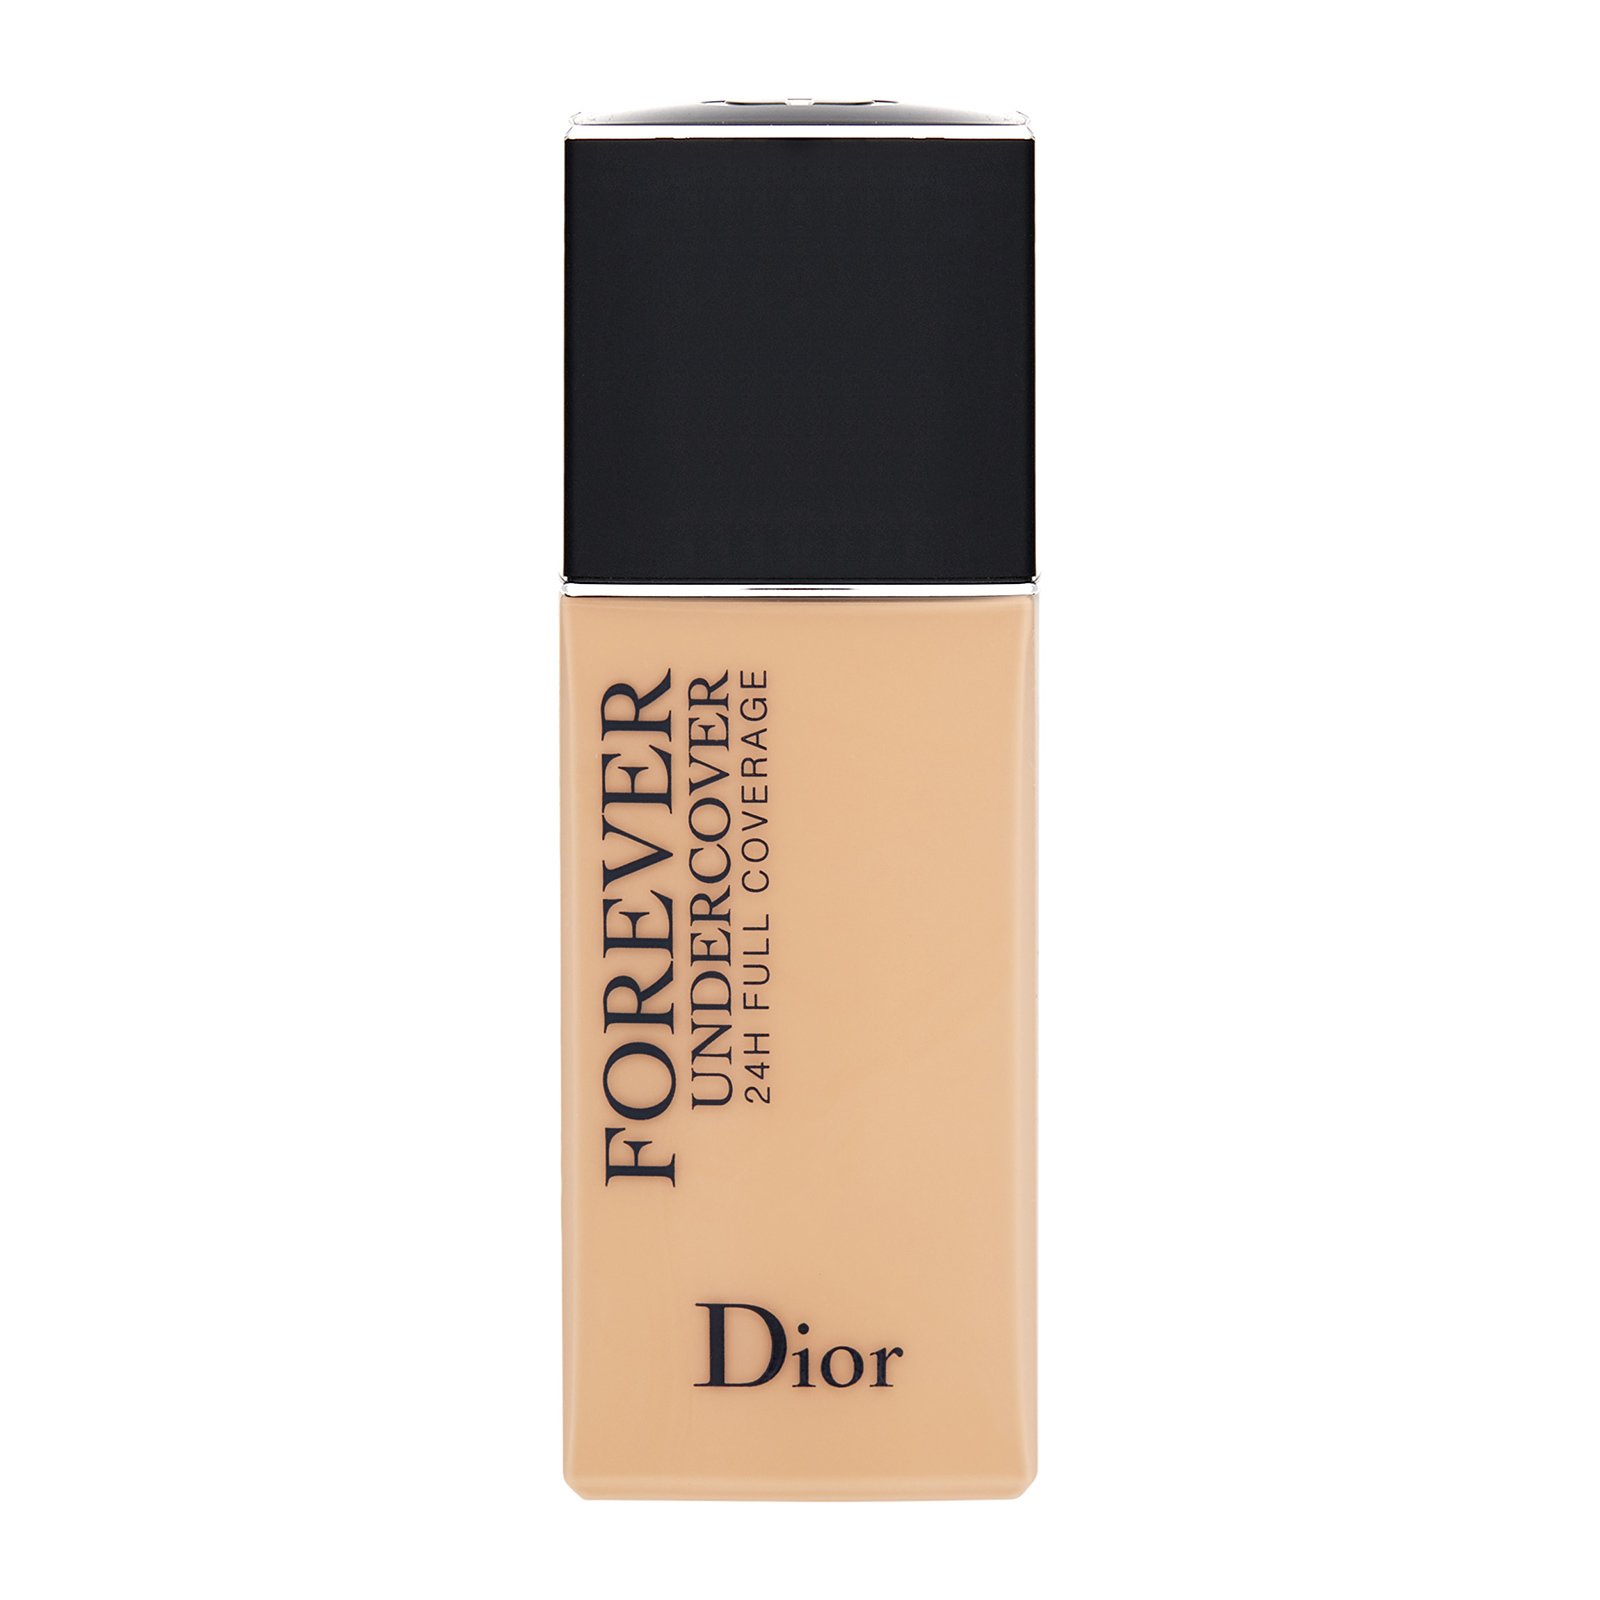 DiorSkin Forever Undercover 24H Wear Full Coverage Fresh Weightless Foundation